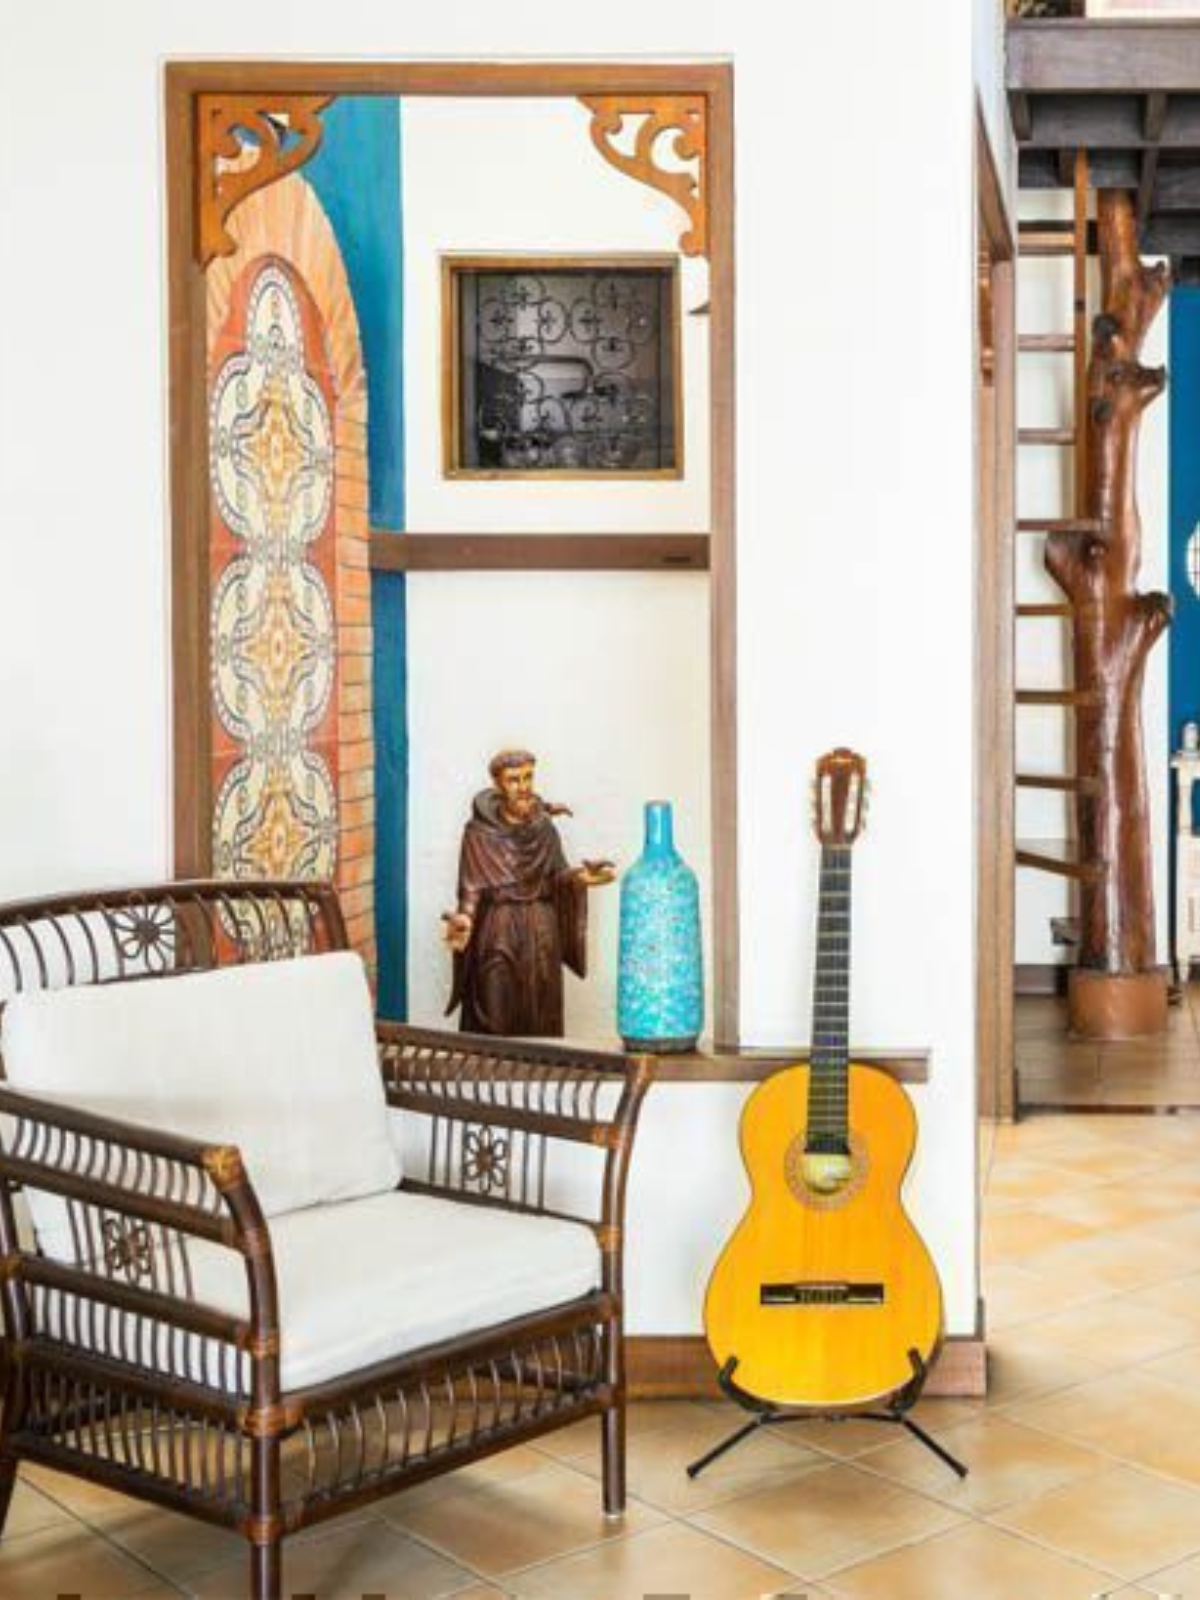 a reading corner with antique sculpture, a standing guitar, tiled flooring and wood and fabric lounge chair